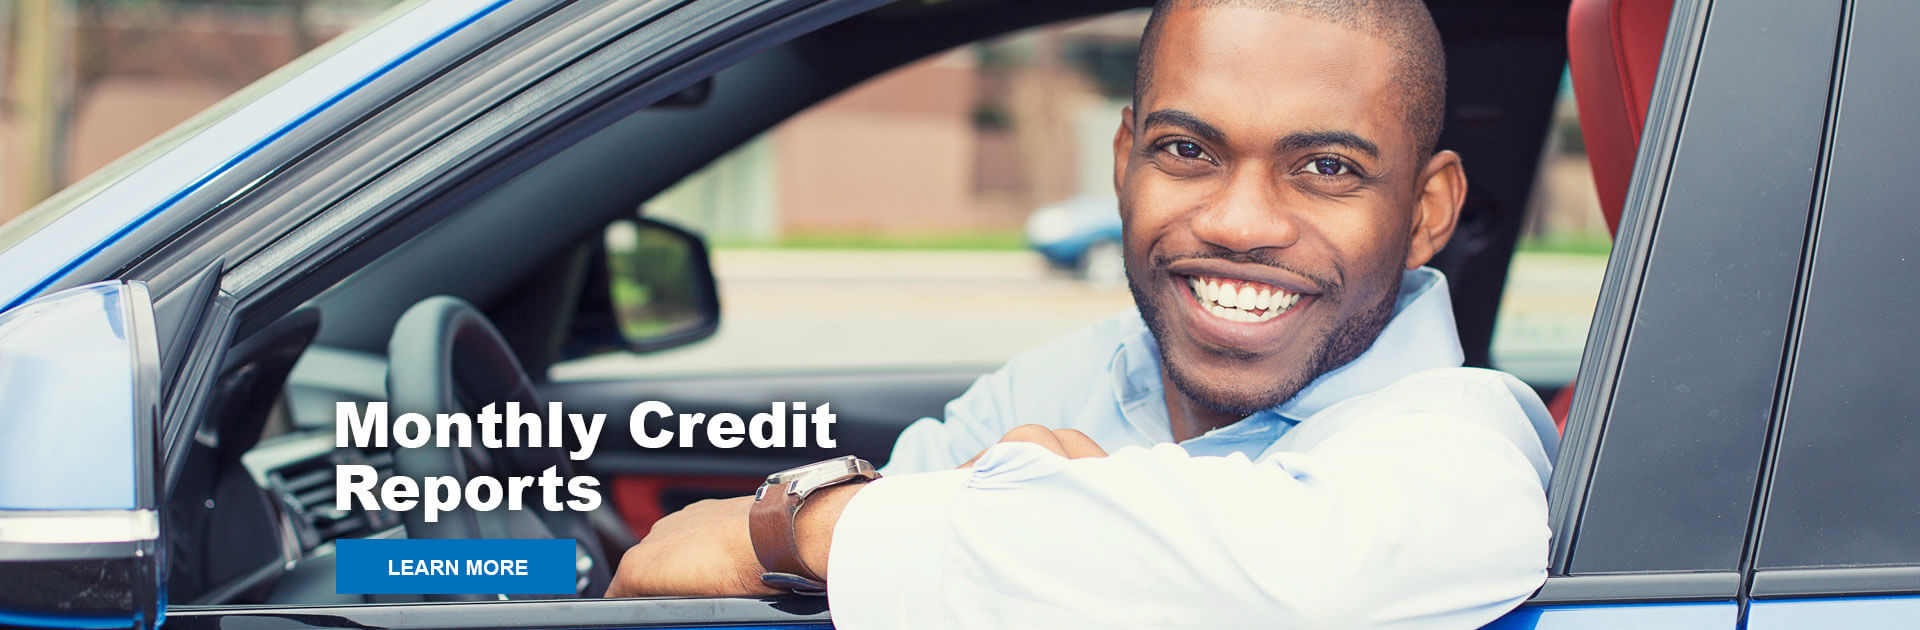 Monthly Credit Reports